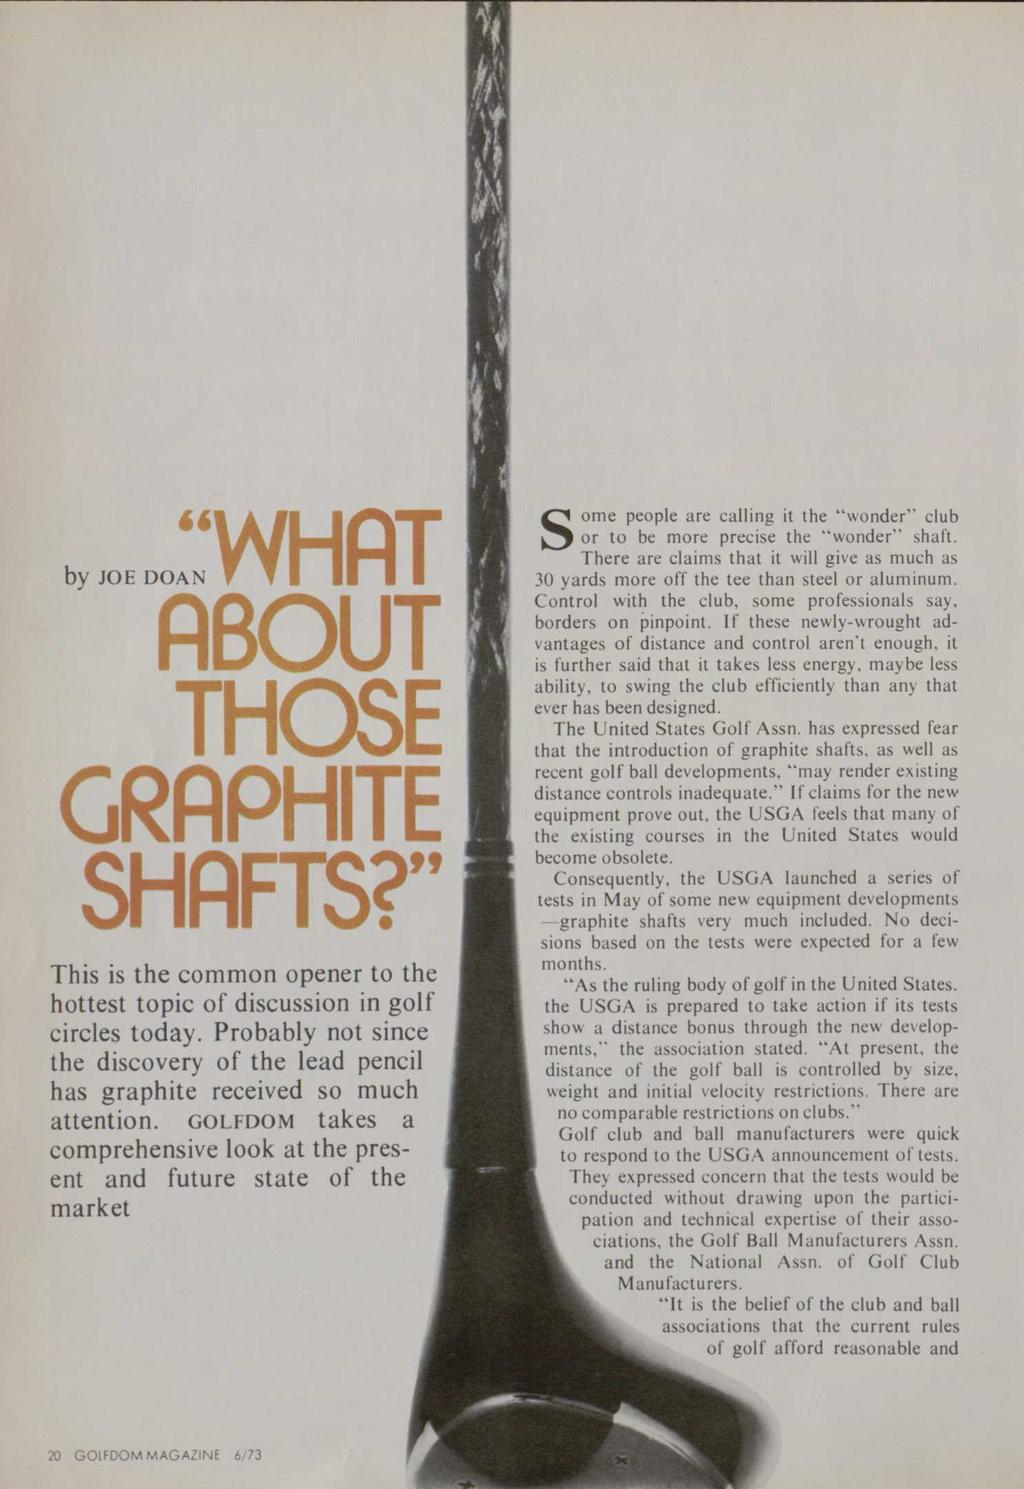 "WHAT by JOE DOAN ABOUT f 1 I THOSE GRAPHITE SHAFTS?" This is the common opener to the hottest topic of discussion in golf circles today.